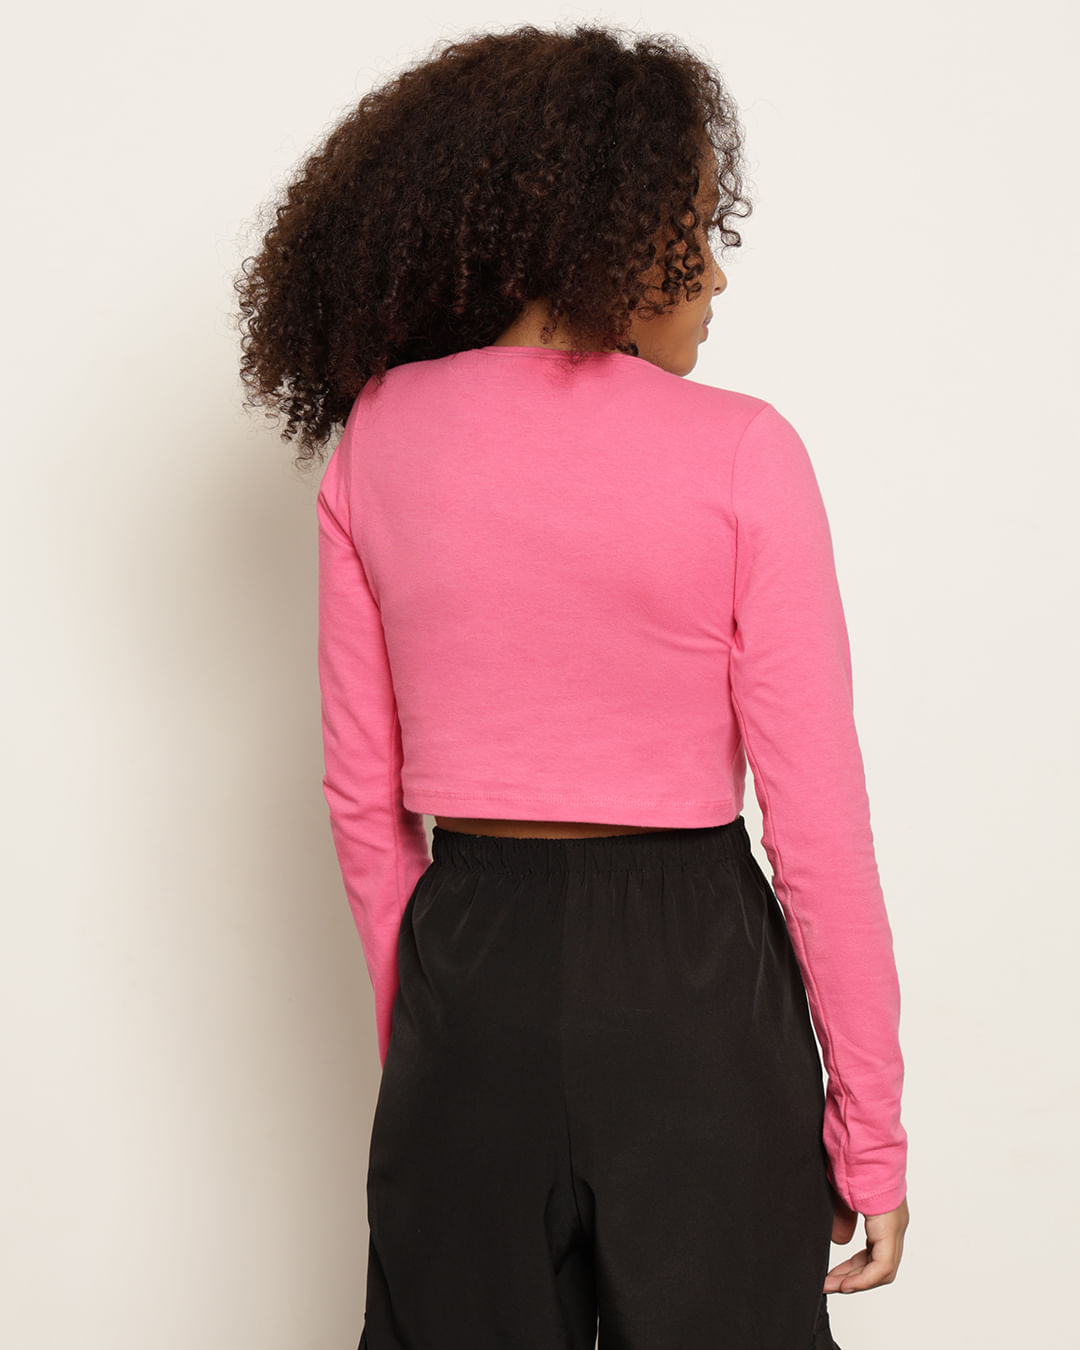 Blusa075344-4-Ml-Cropped-Pink-F1016---Rosa-Escuro